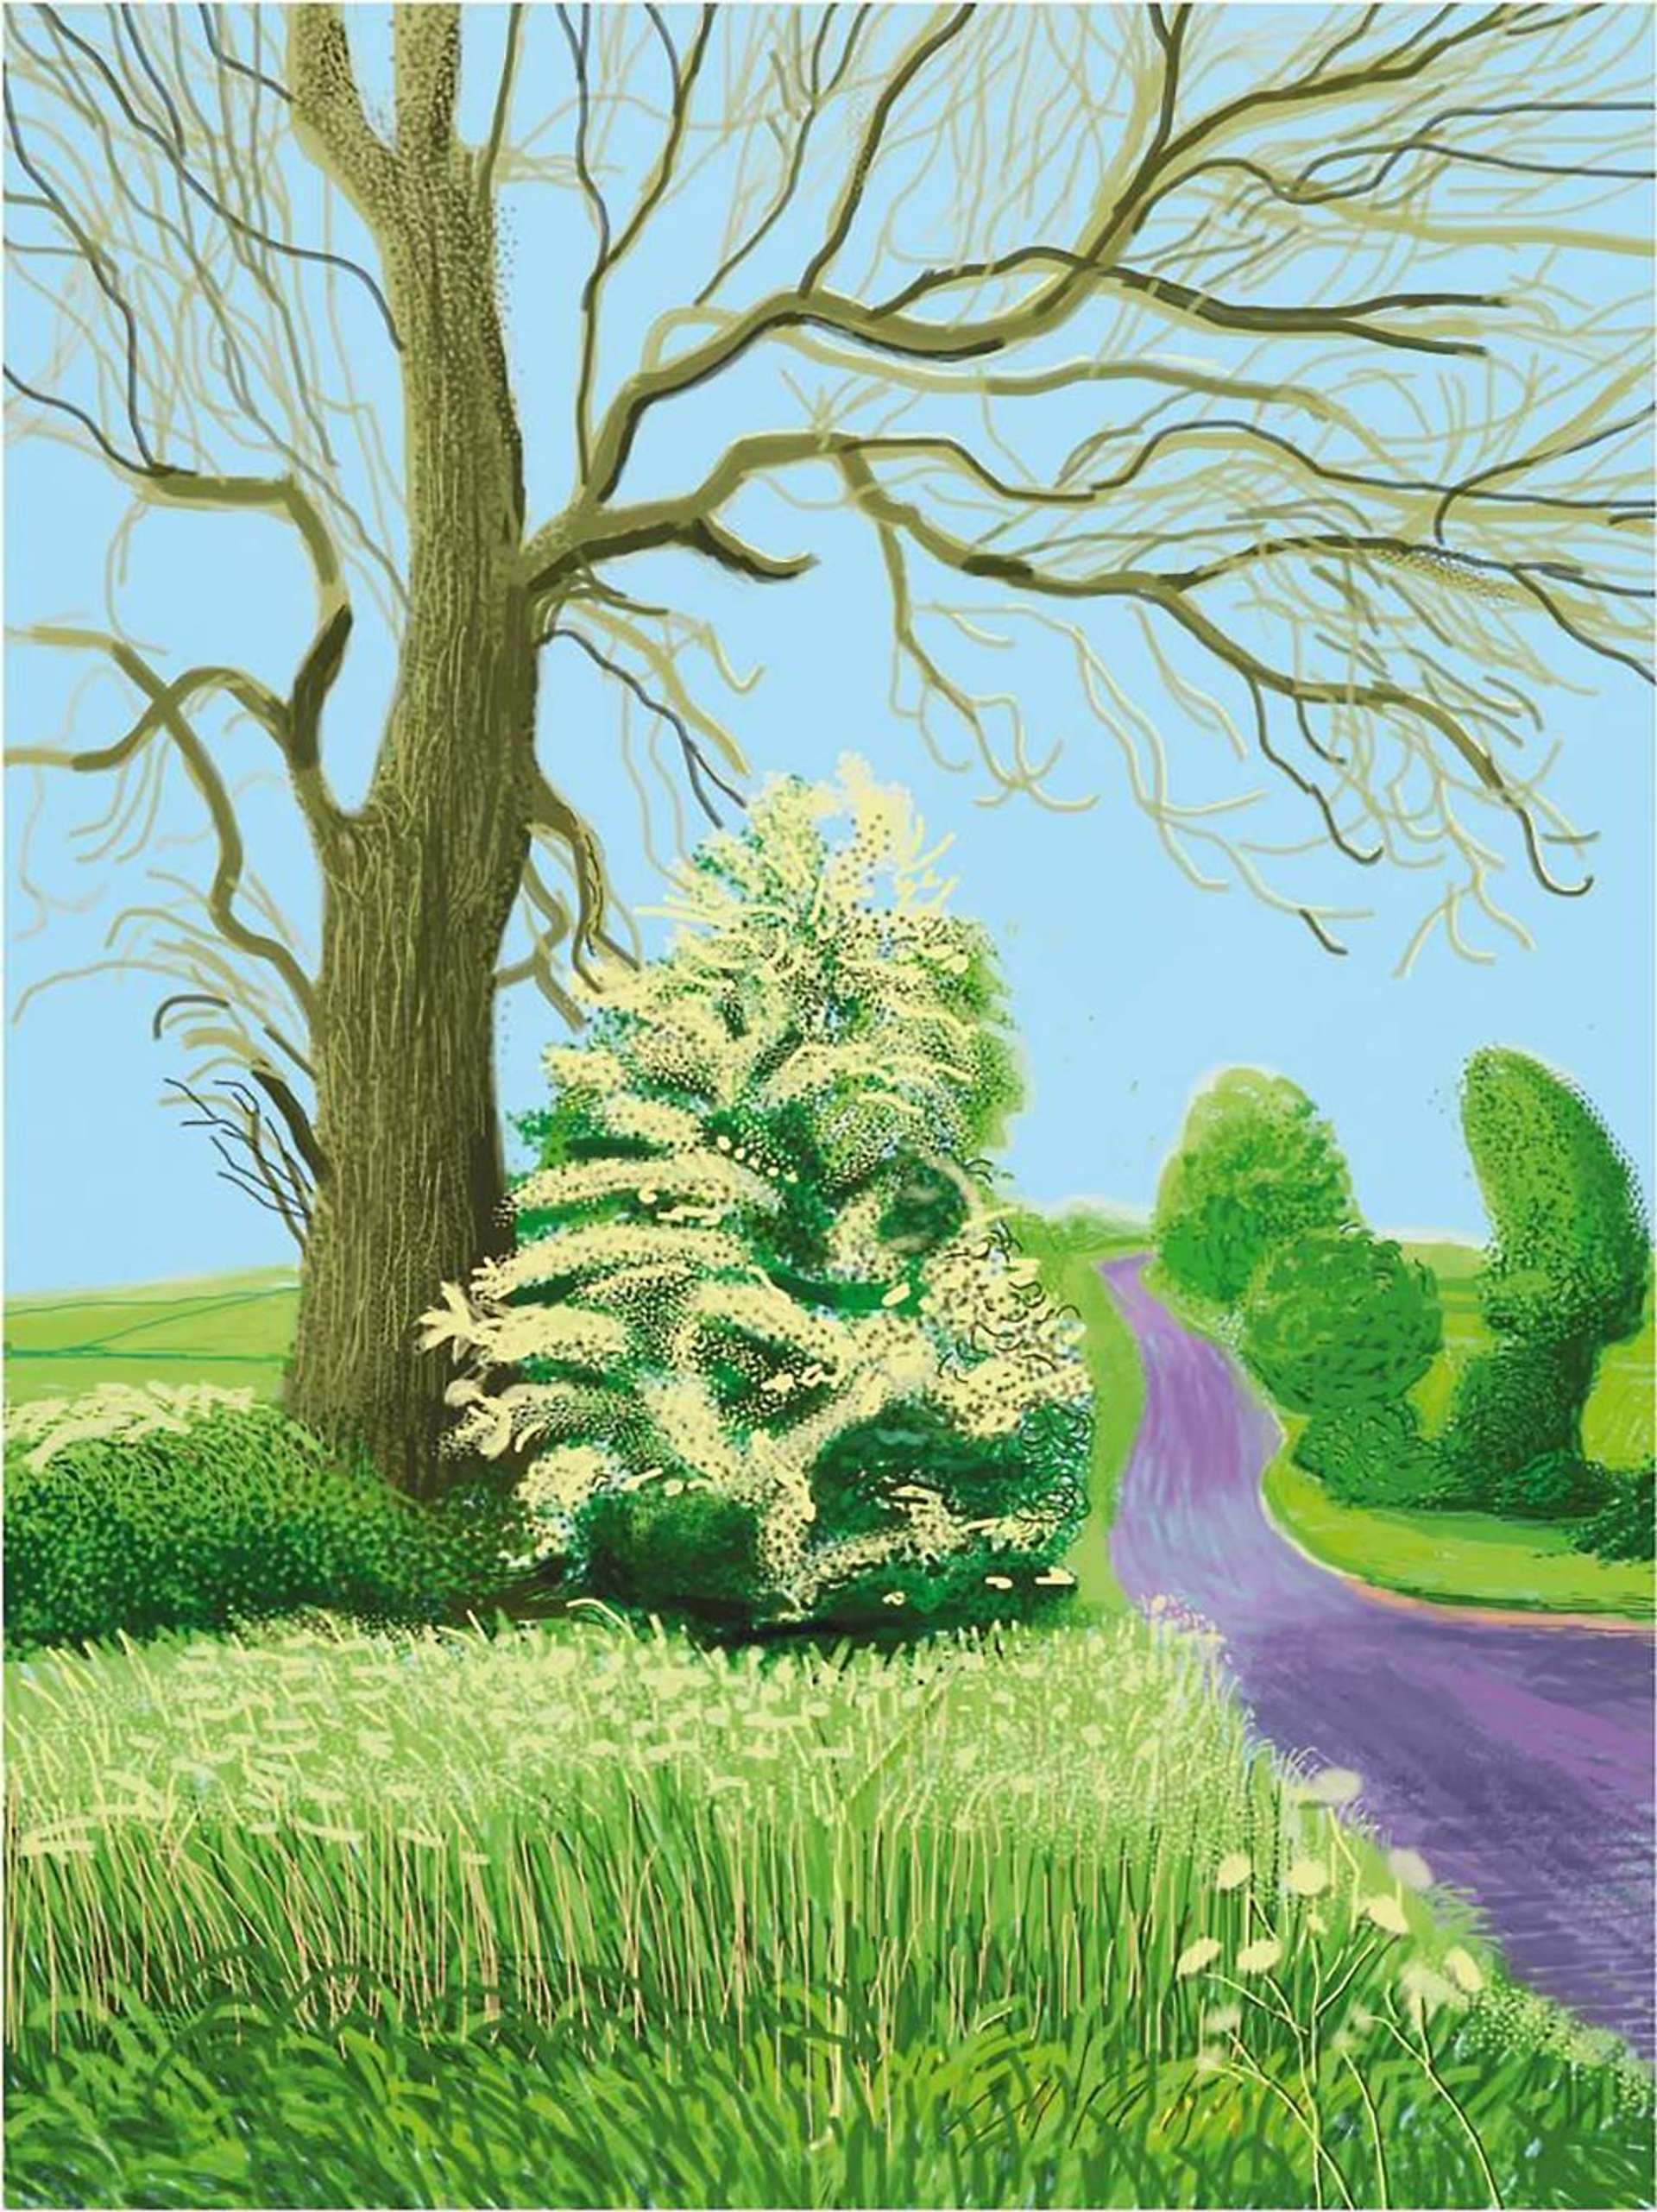 A landscape by David Hockney, showing a flowering bush against a tall tree, next to a path.